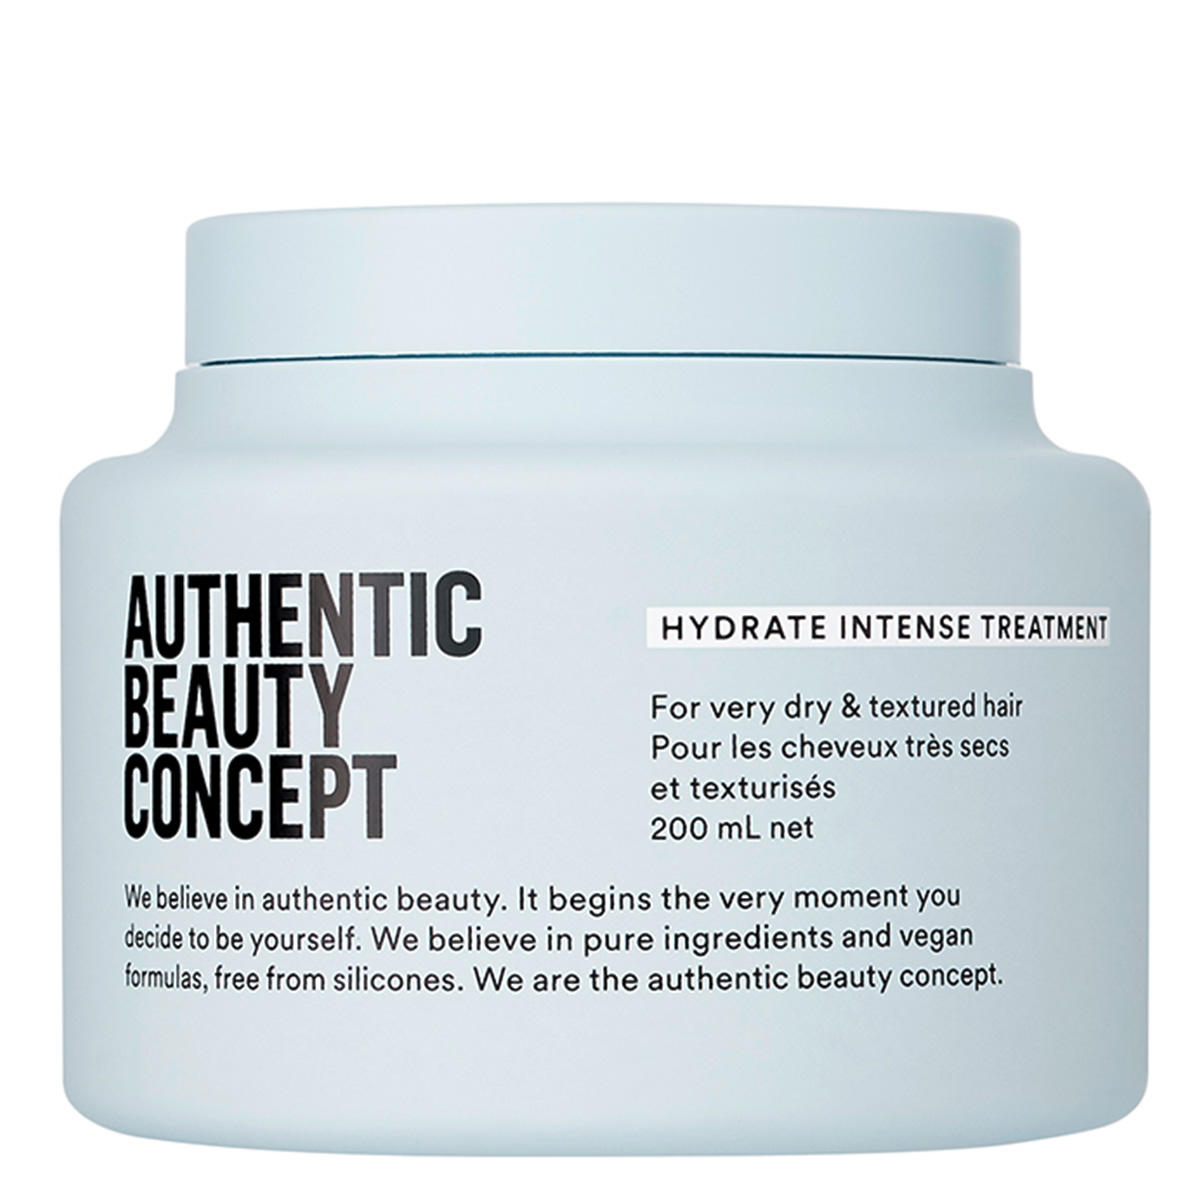 Authentic Beauty Concept Hydrate Intense Treatment 200 ml - 1